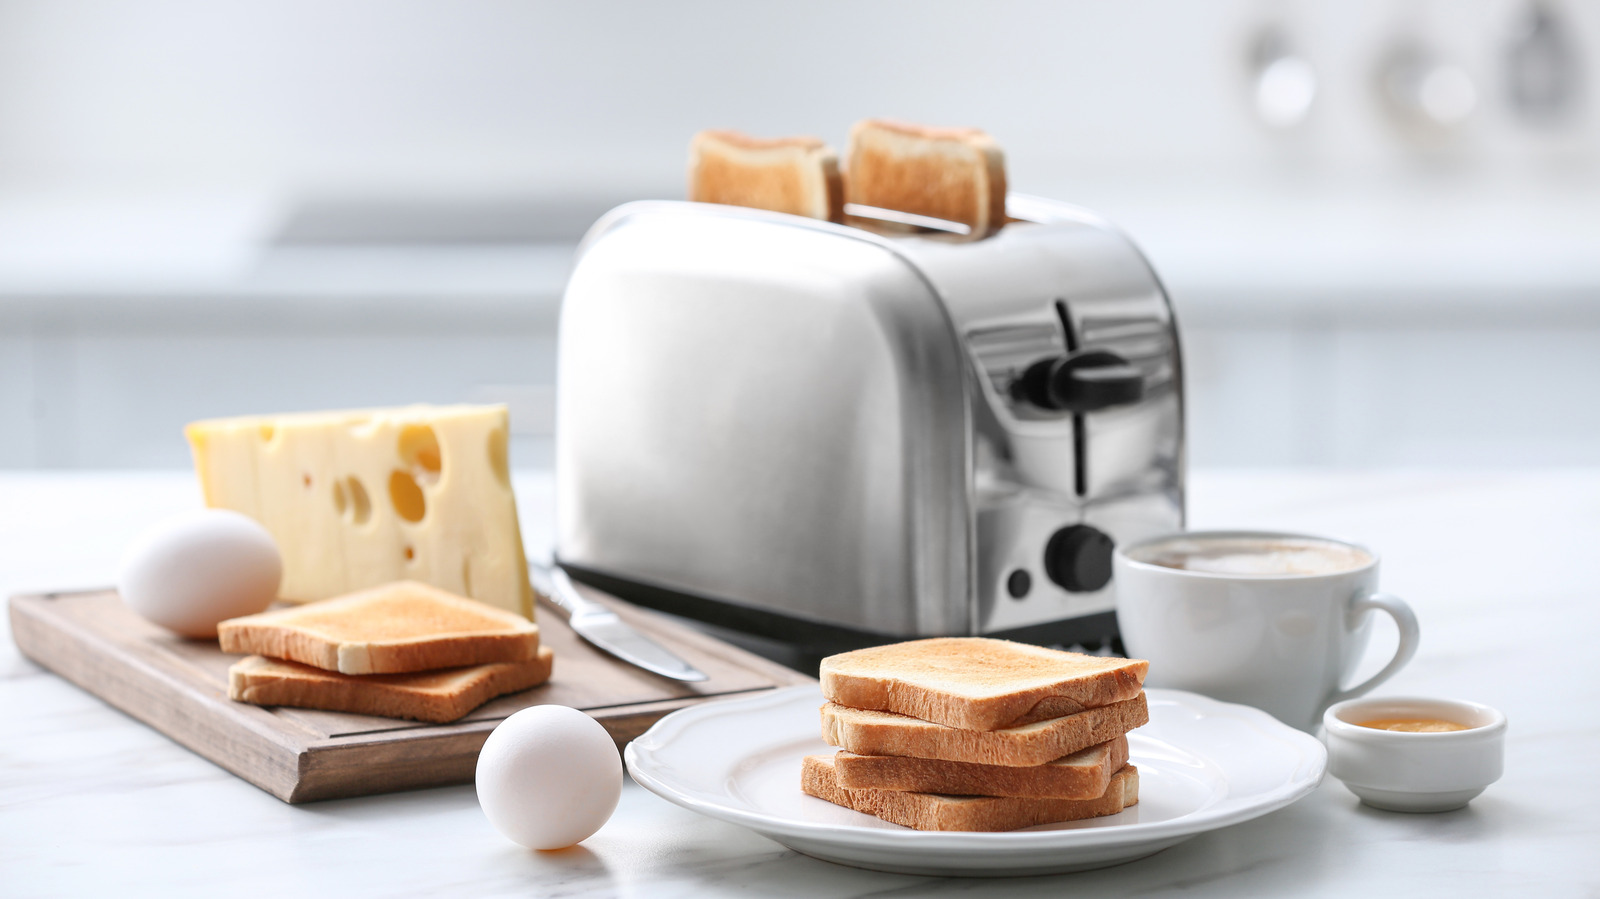 The Absolute Best Uses For Your Toaster